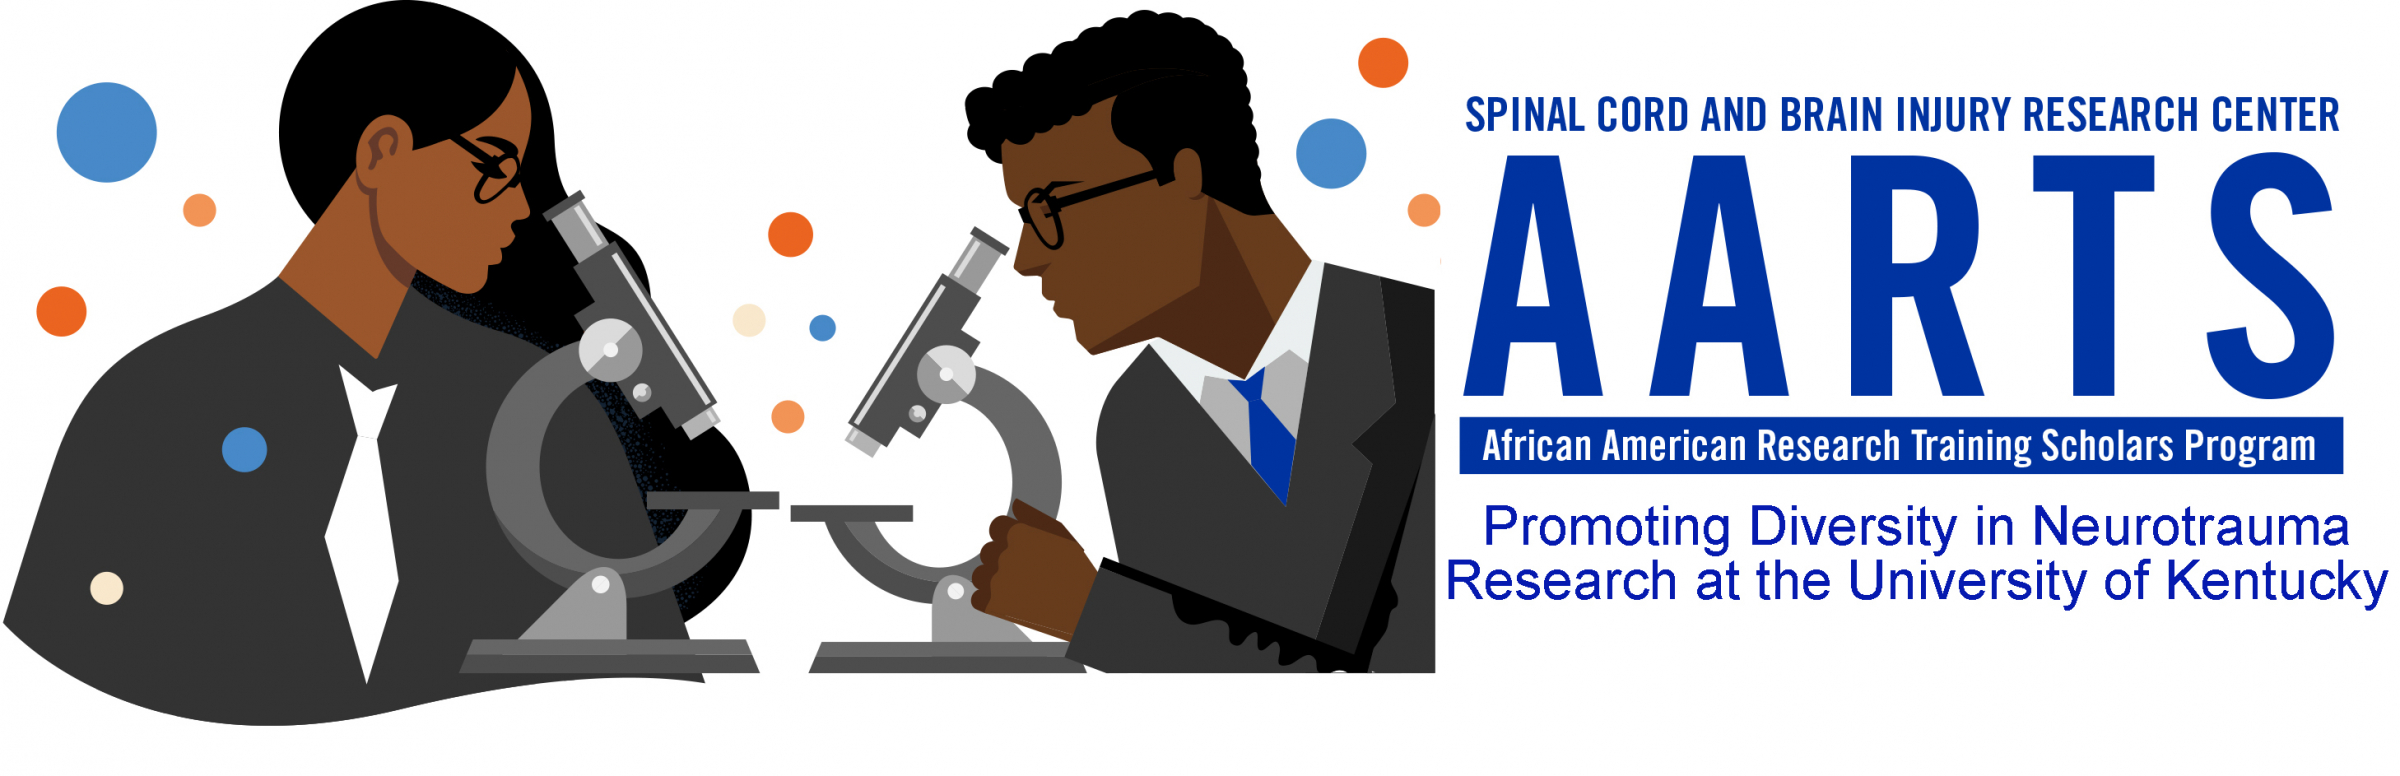 Spinal Cord and Brain Injury Research Center AARTS: African American Research Training Scholars Program, Promoting Diversity in Neurotrauma Research at the University of Kentucky